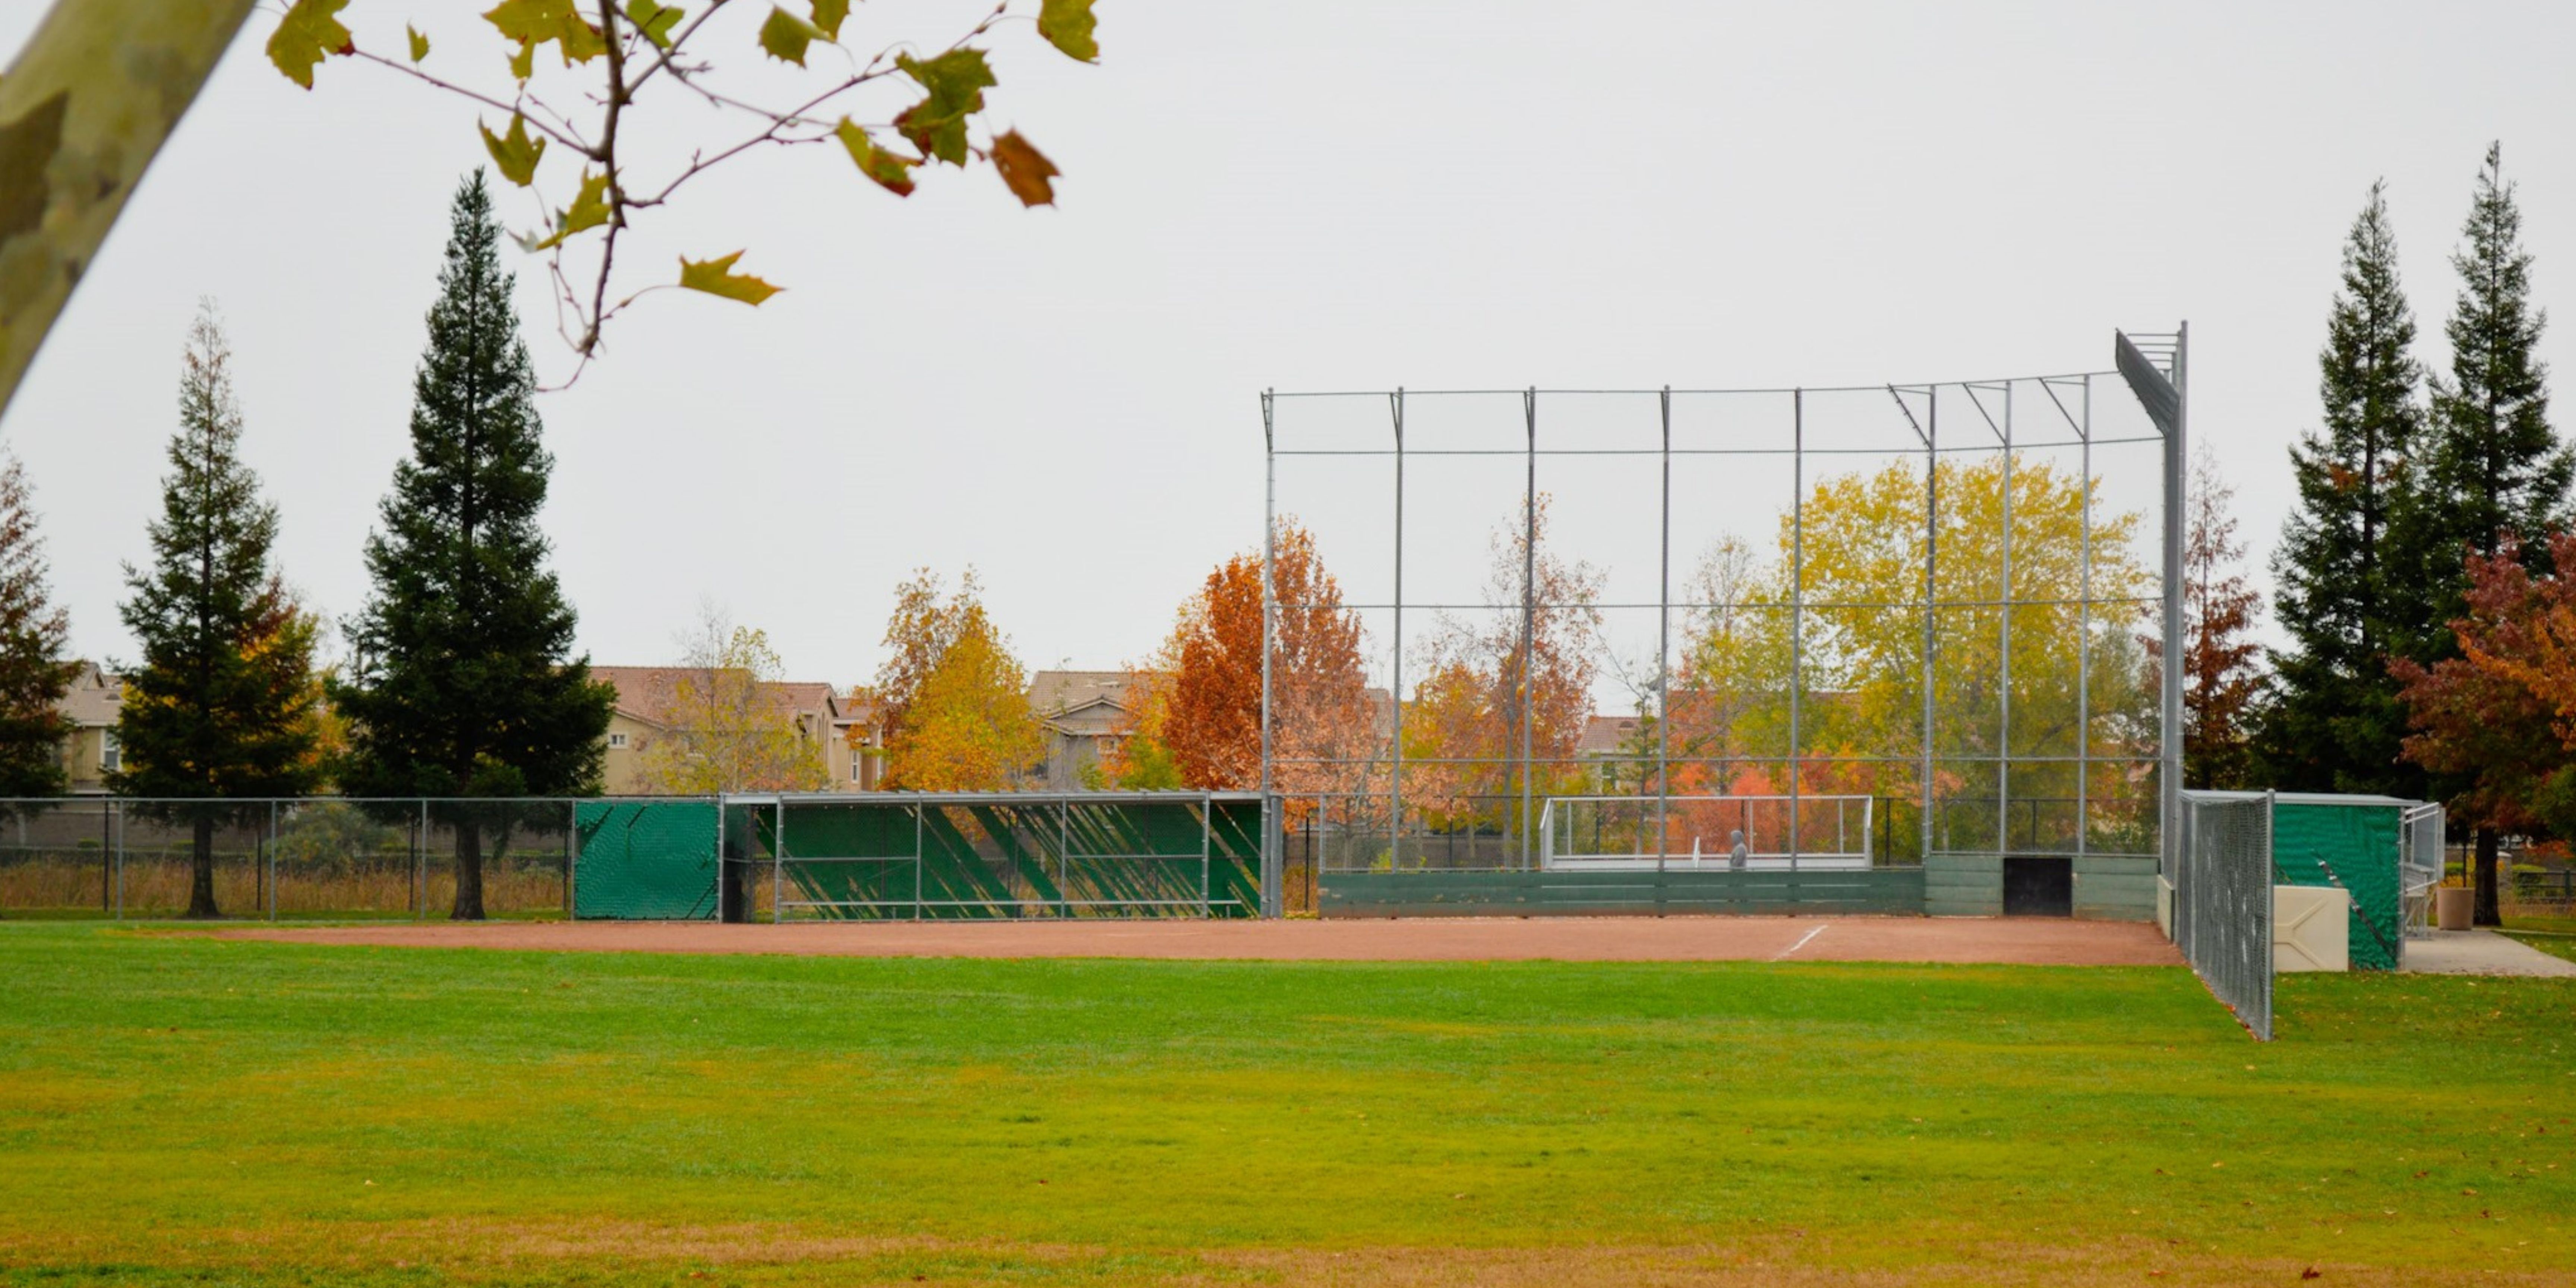 Baseball field with green grass during fall